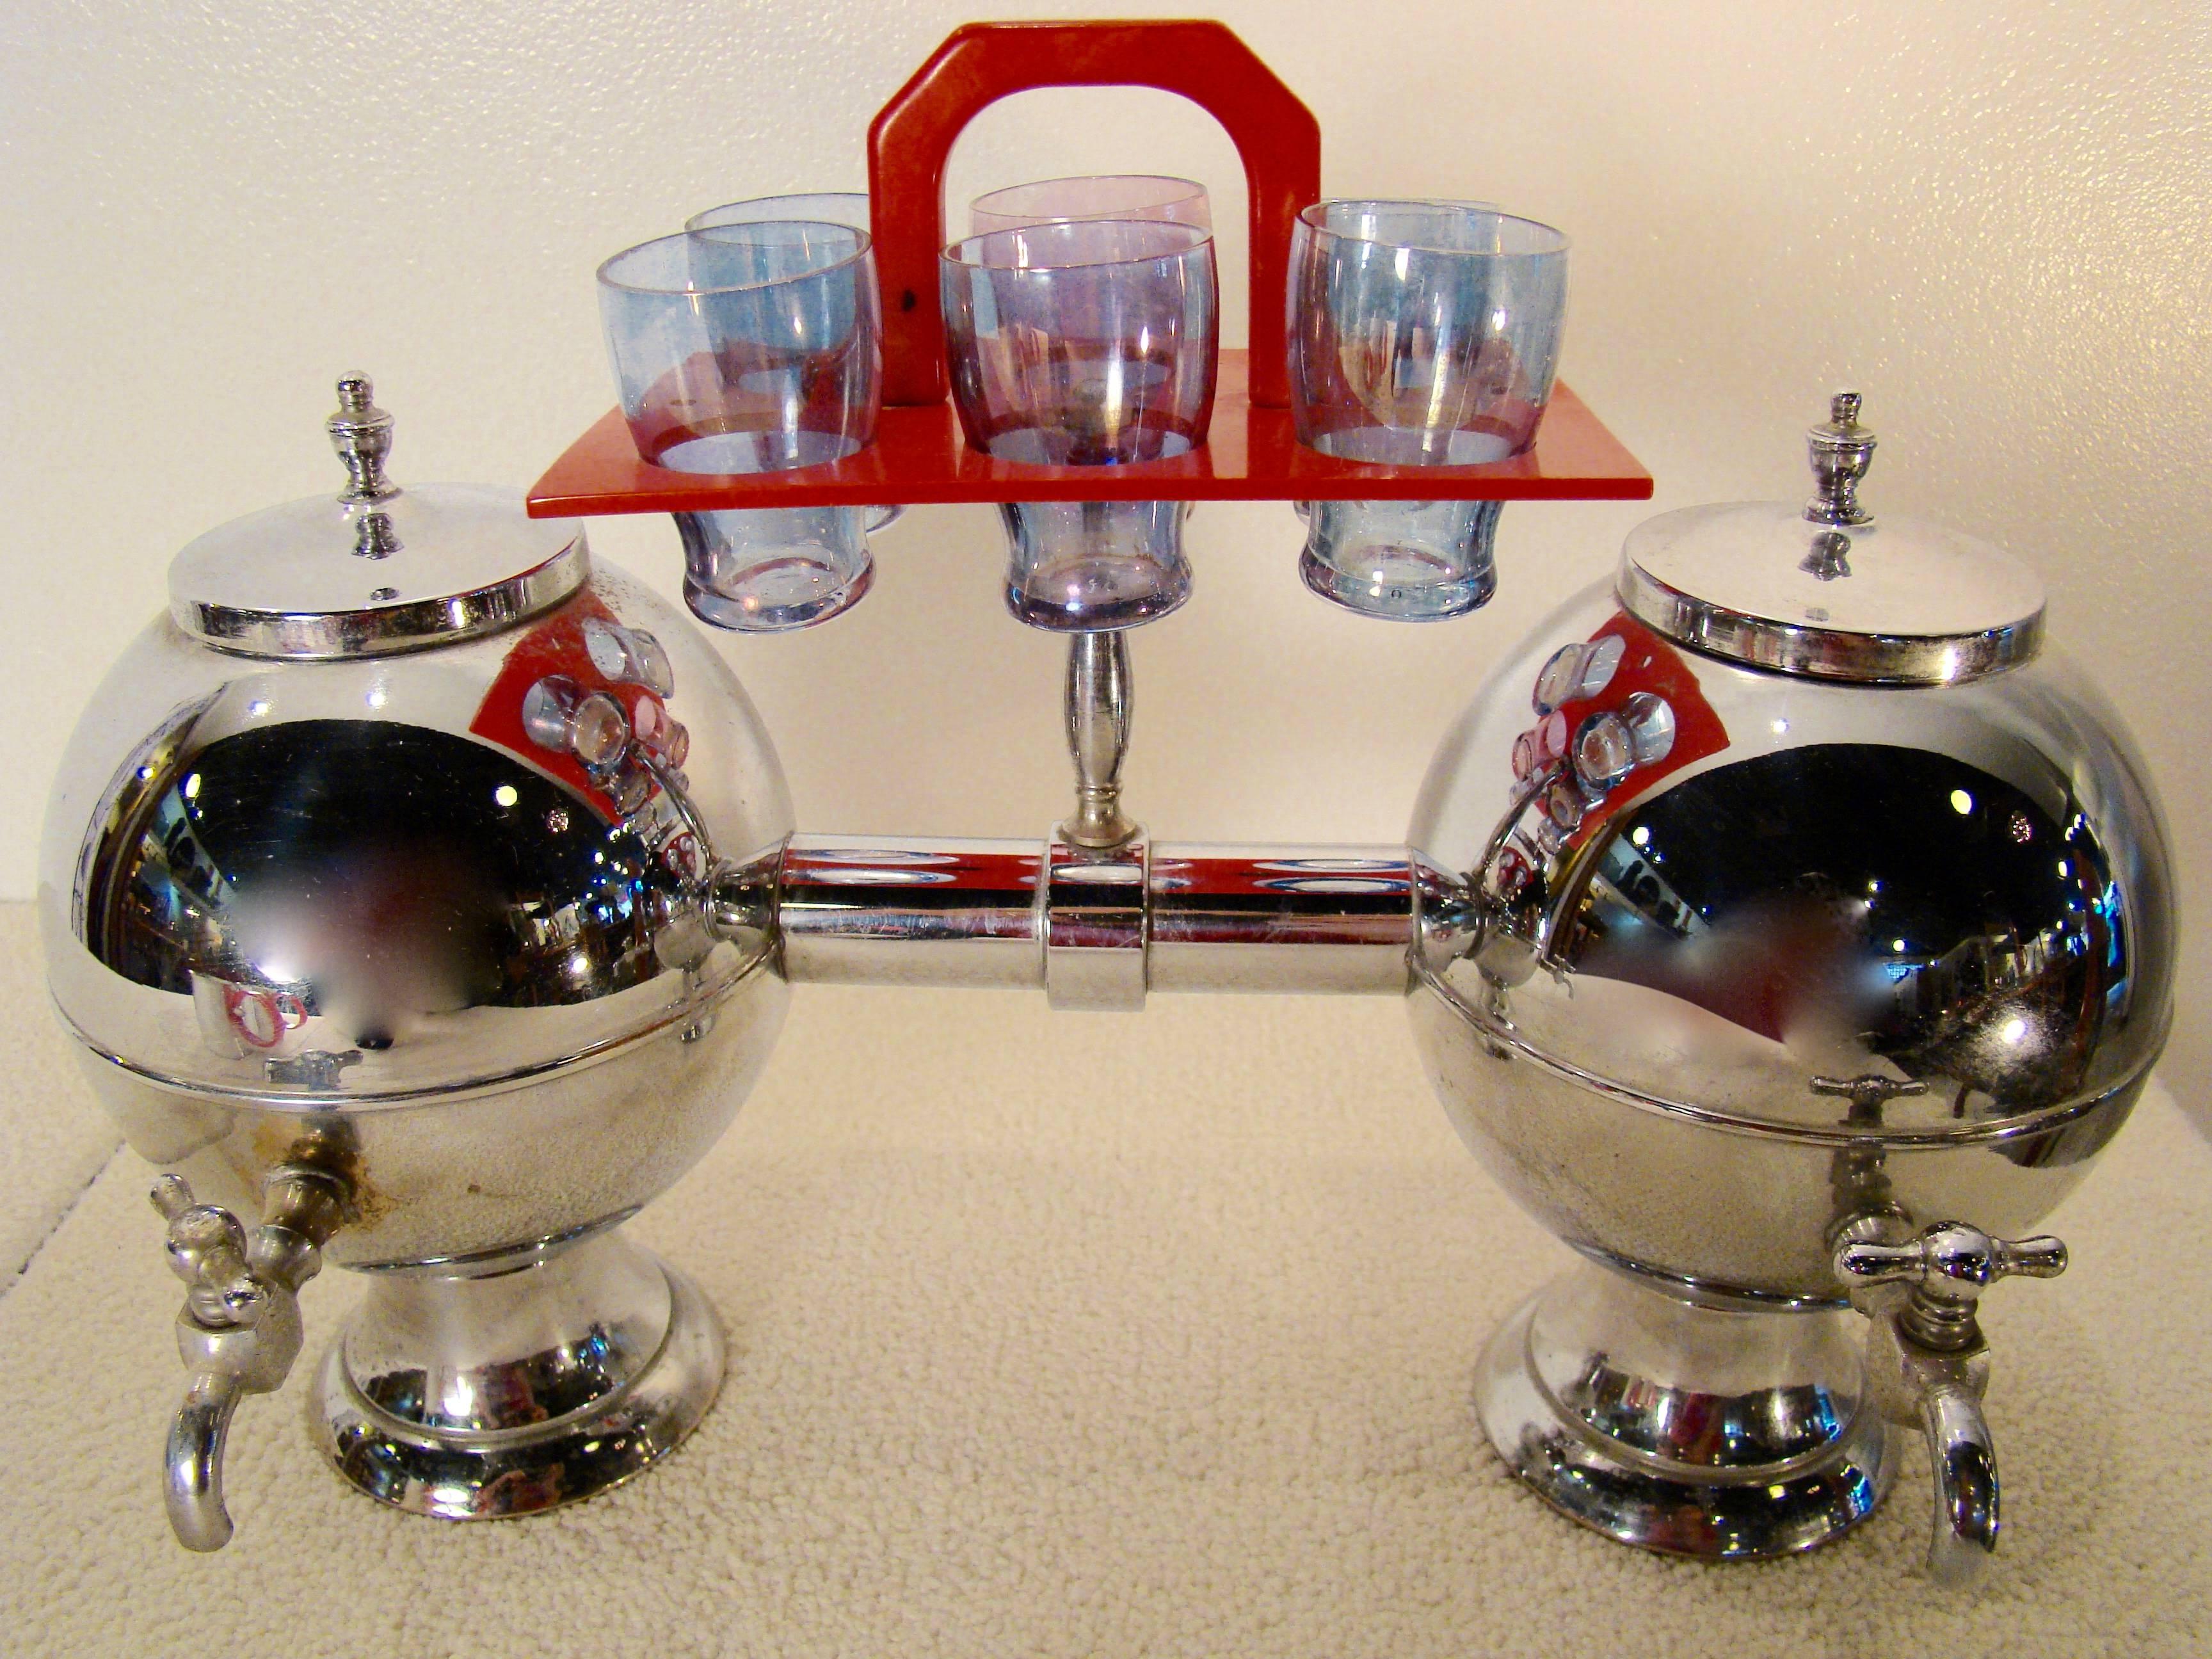 Double orb chrome liquor dispenser with six glass shot glasses that sit in a bakelite holder, circa 1940s. Marked chromium on the bottom of decanter. Rare and stunning piece. Two spun aluminium mugs with bakelite handles stamped Hannah Porter New